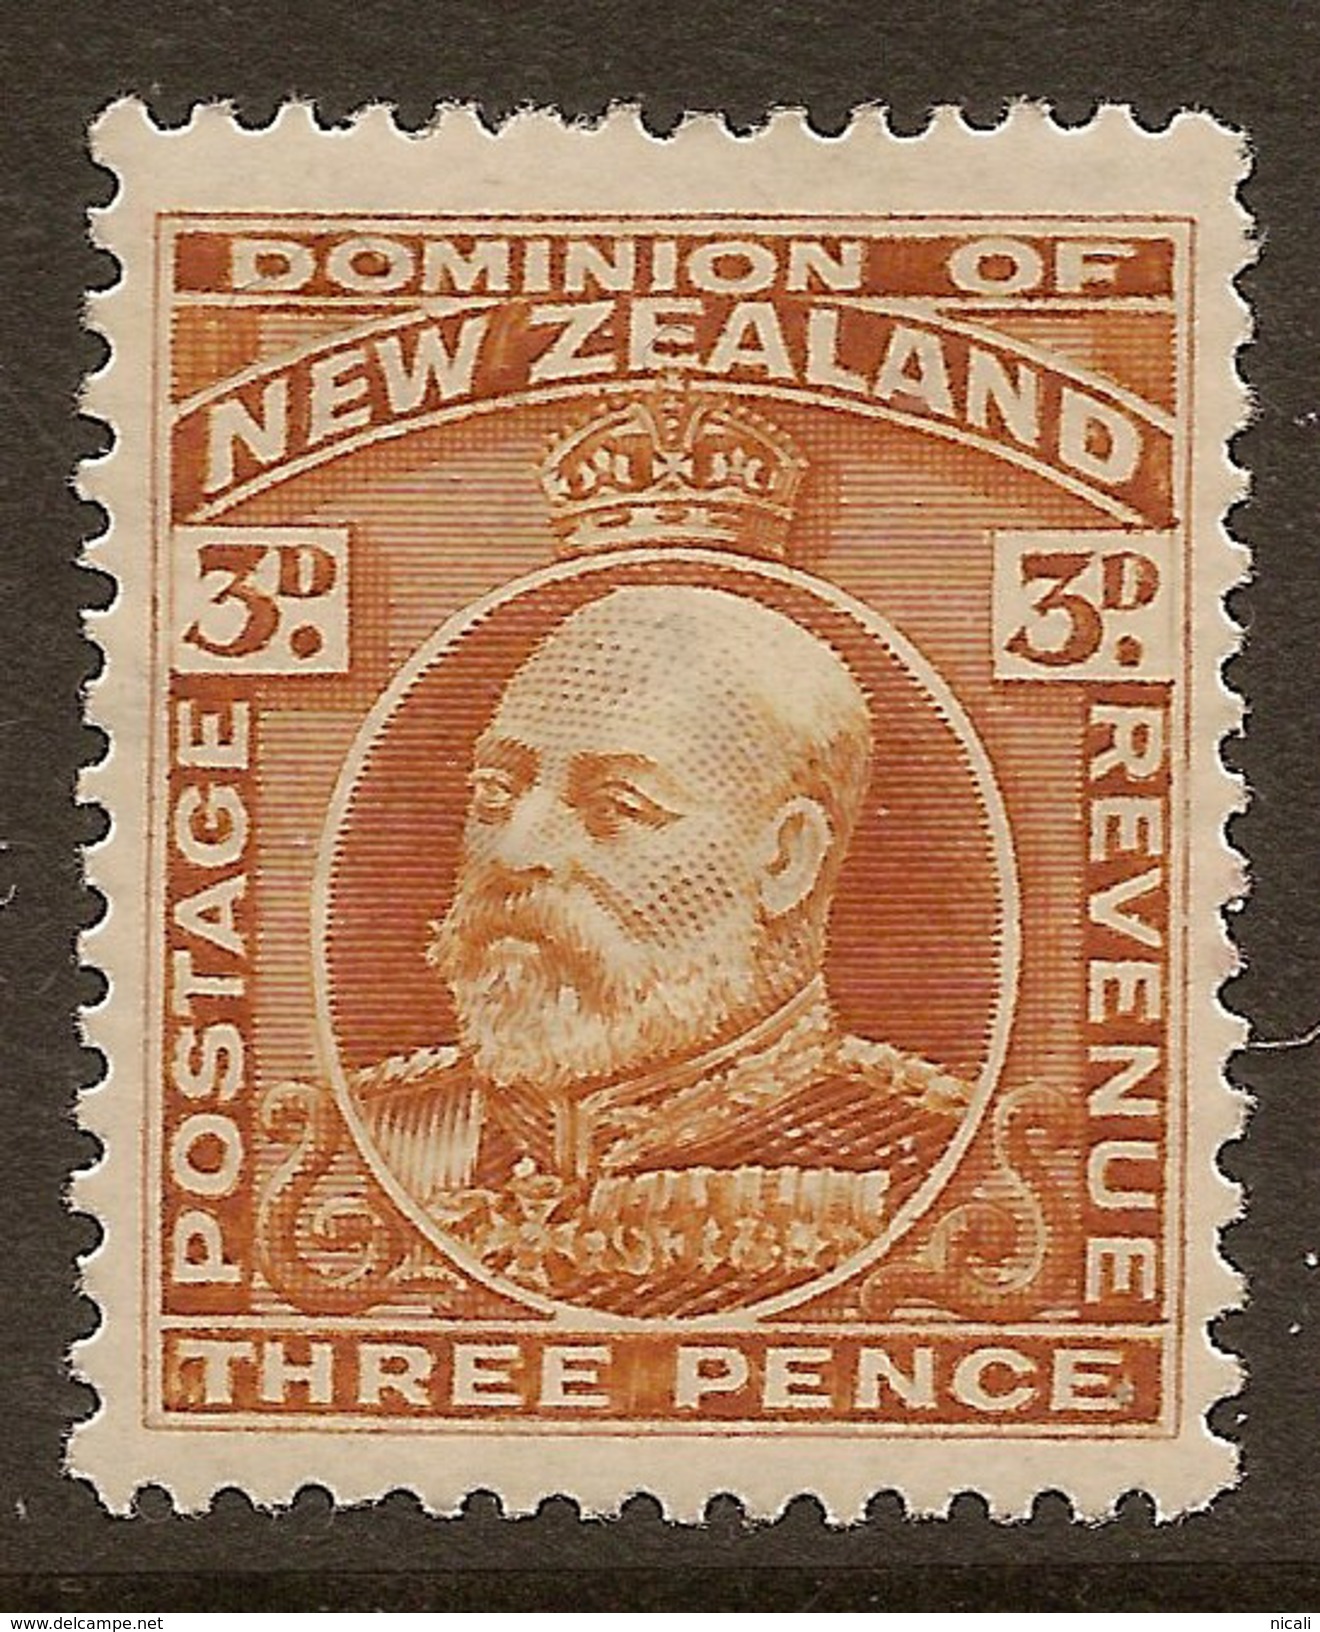 NZ 1909 3d KEVII P14x14.5 SG 389 HM #YS316 - Unused Stamps